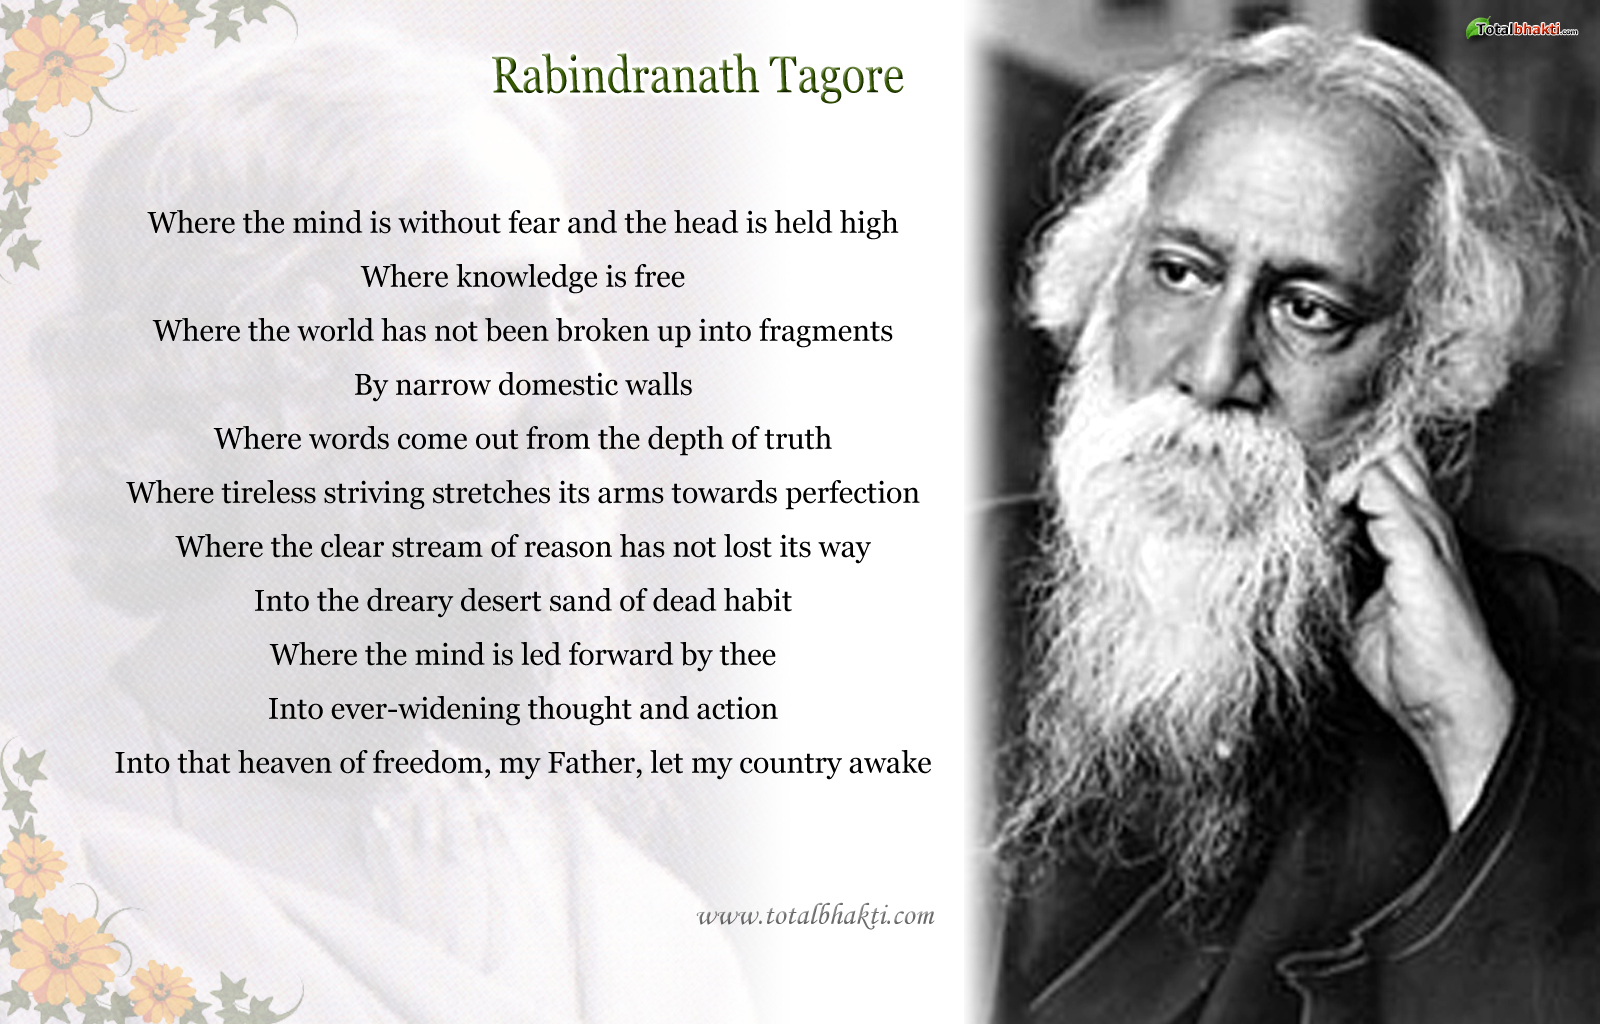 write biography about rabindranath tagore